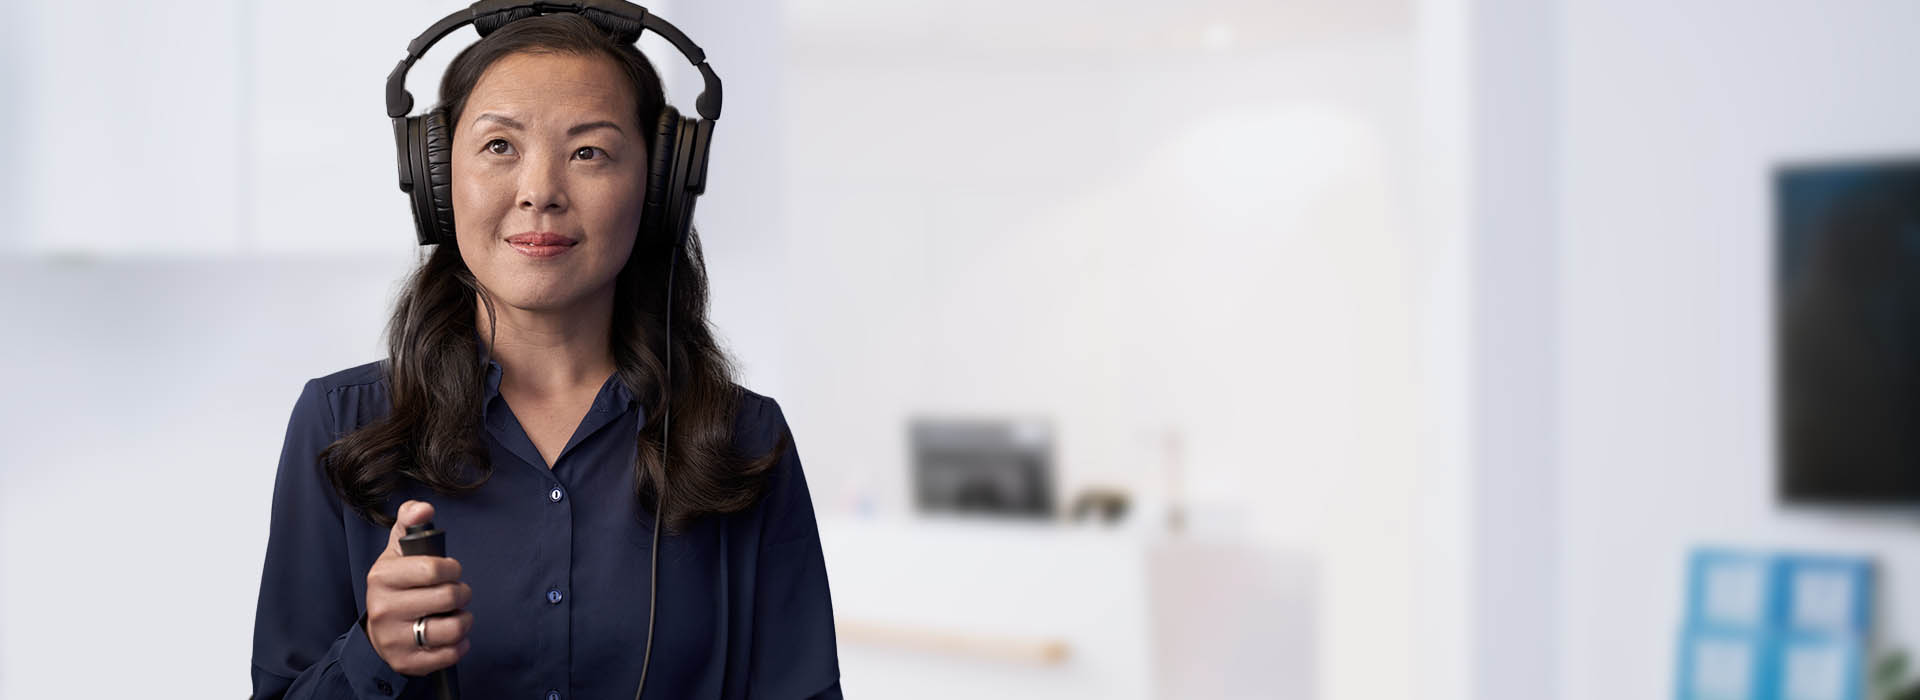 Image shows woman during hearing test with headphones on